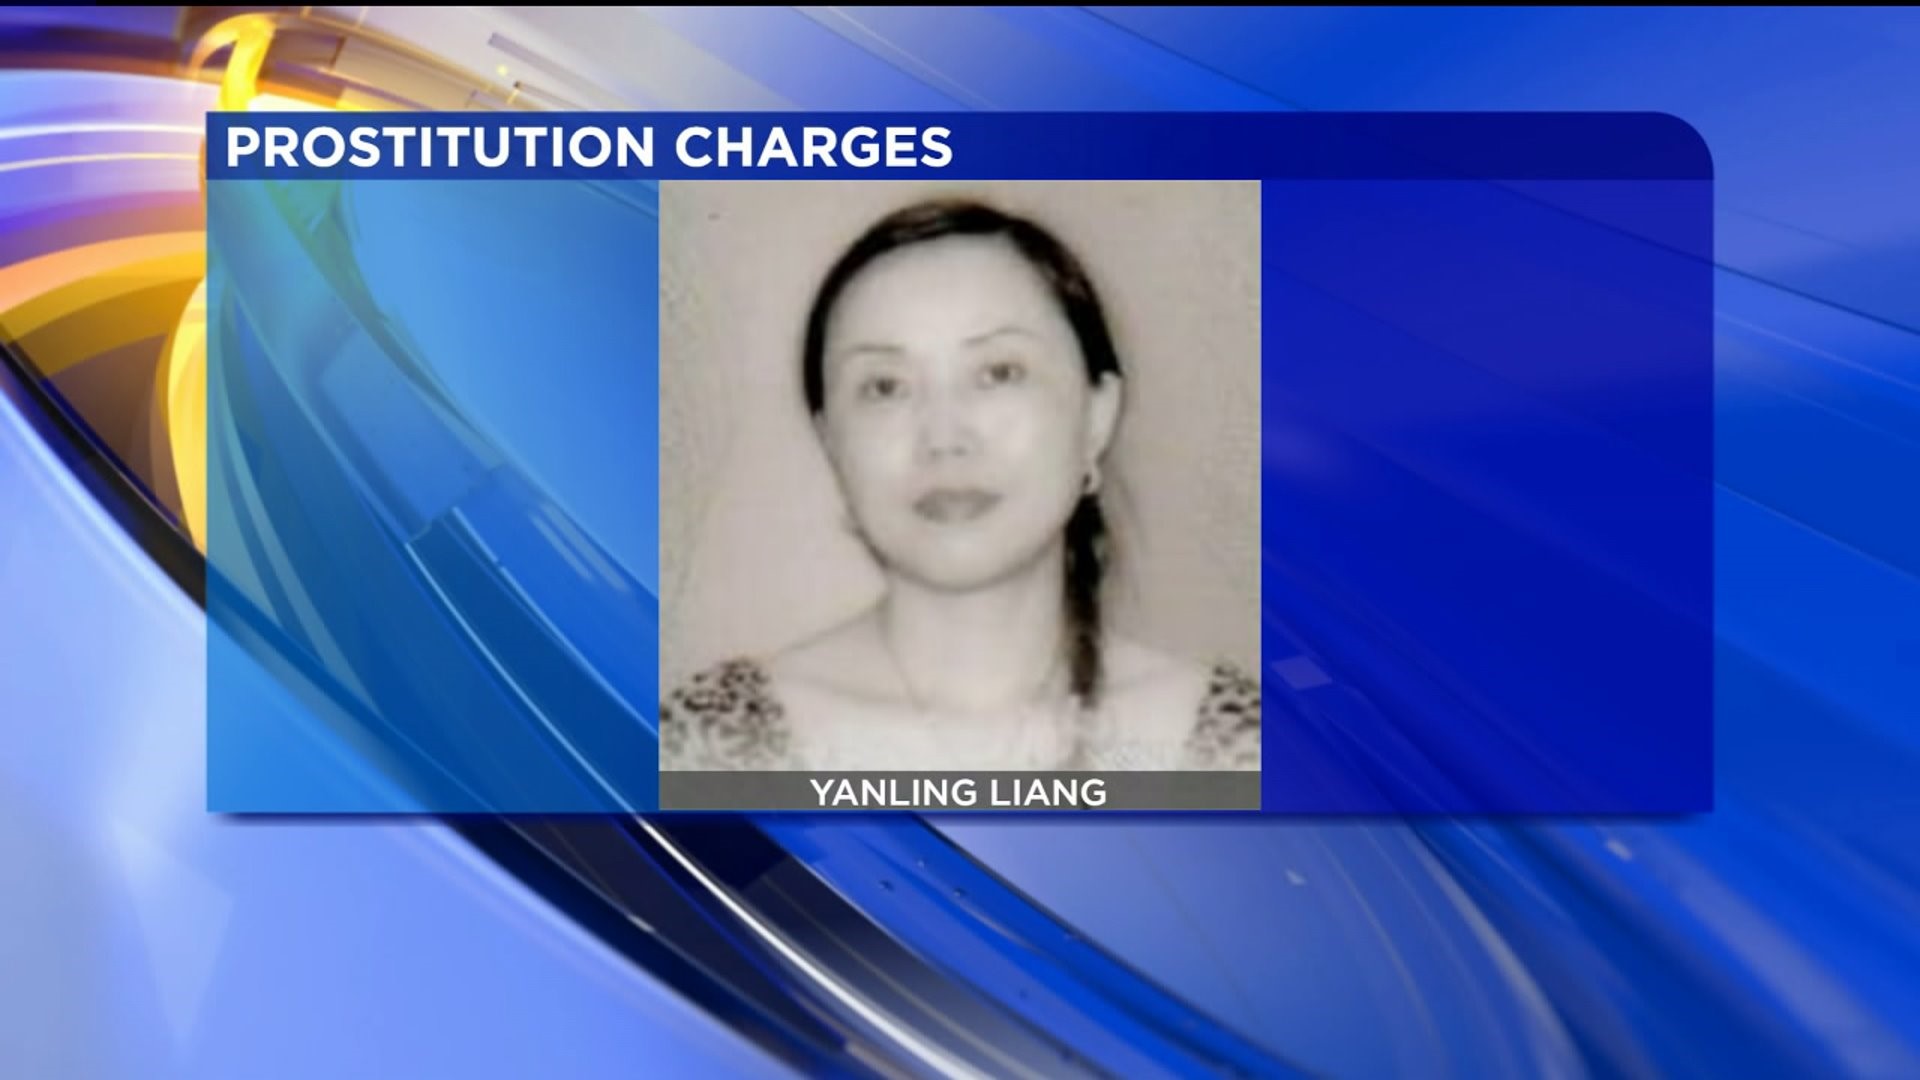 Massage Parlor Raided, Woman Charged with Prostitution